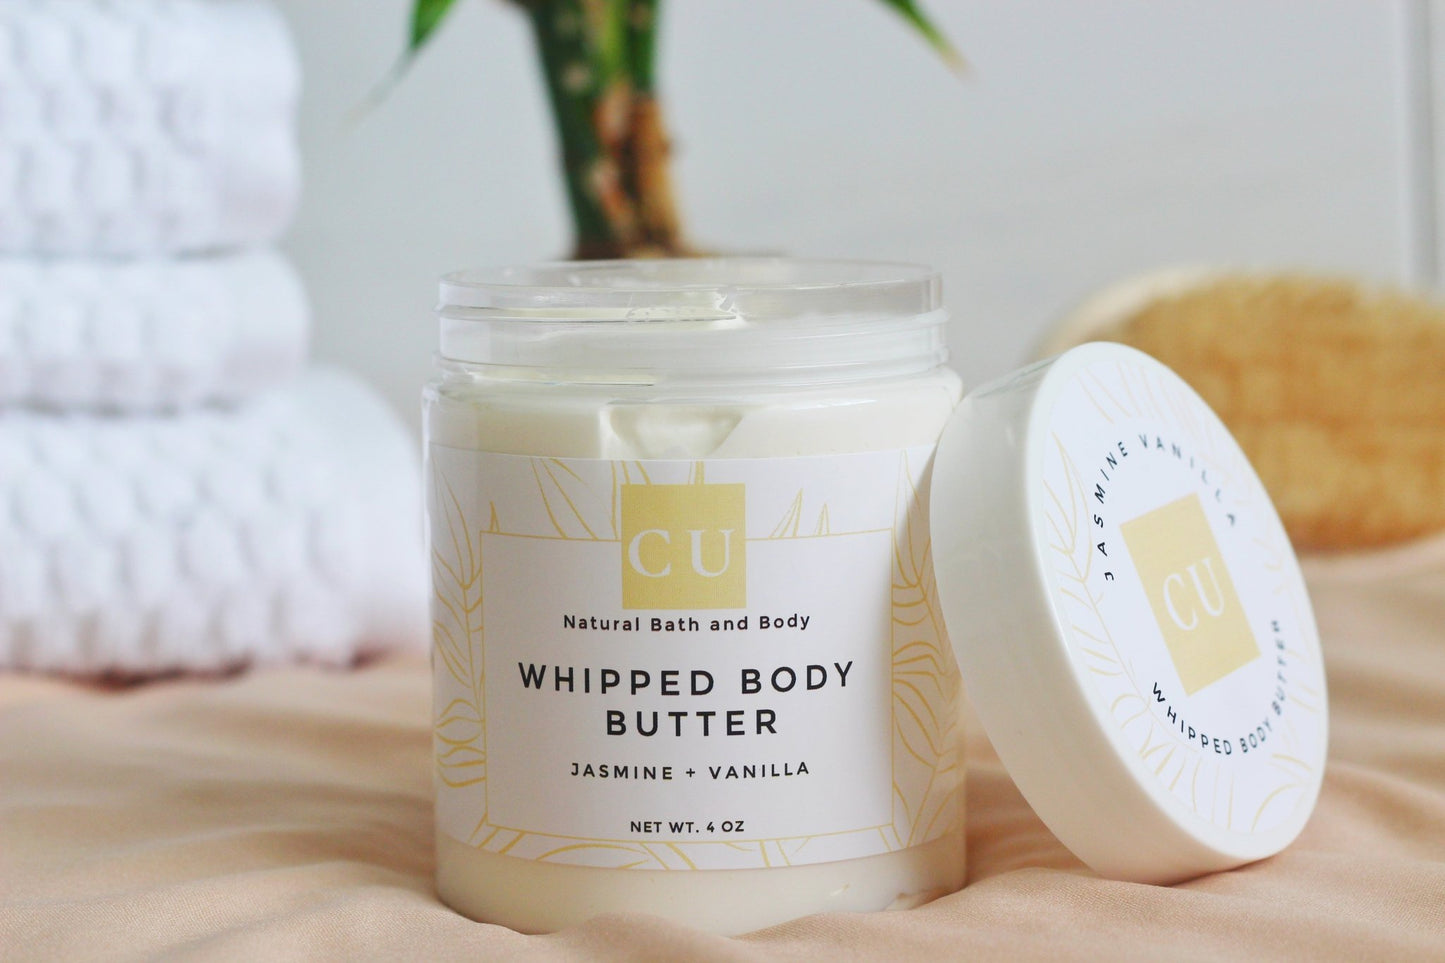 Jasmine and Vanilla whipped natural body butter